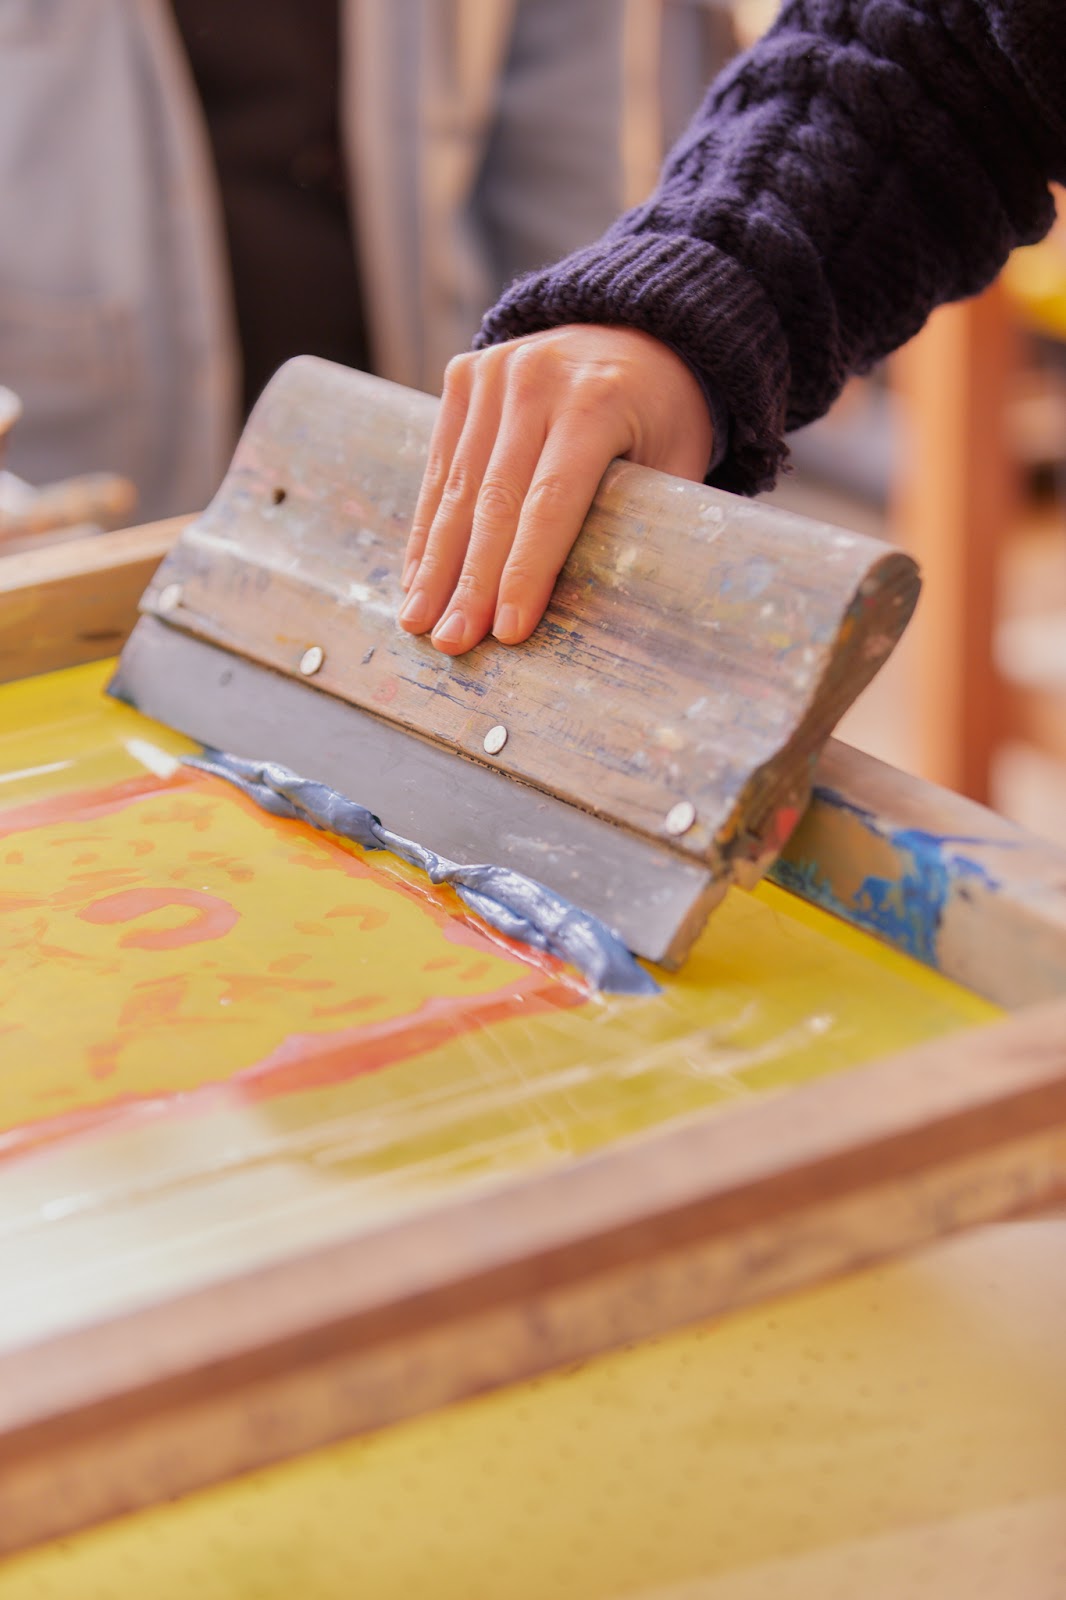 Image: A hand holding a squeegee with a wooden grip and metal inset, pressing into grayish blue ink on a yellow and orange screen in a wooden frame. Photo by Sarah Joyce.